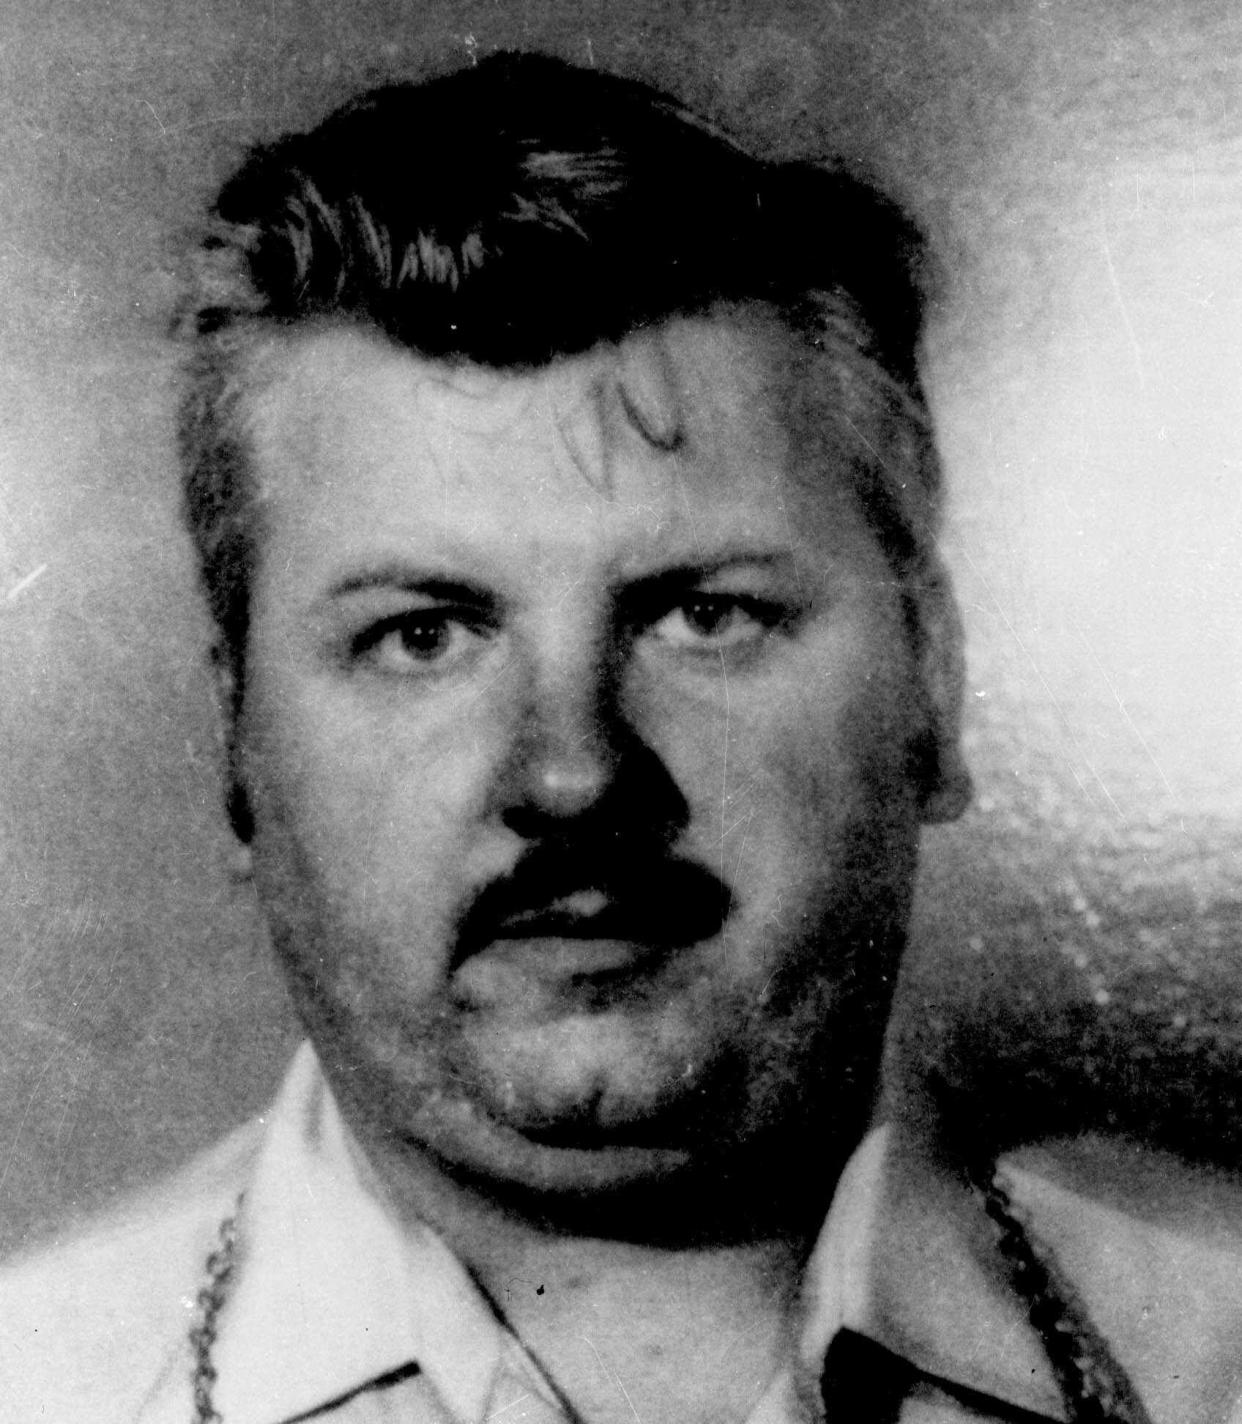 This 1978 file photo shows serial killer John Wayne Gacy, who was convicted of killing 33 young men and boys in the Chicago area in the 1970s and executed in 1994.